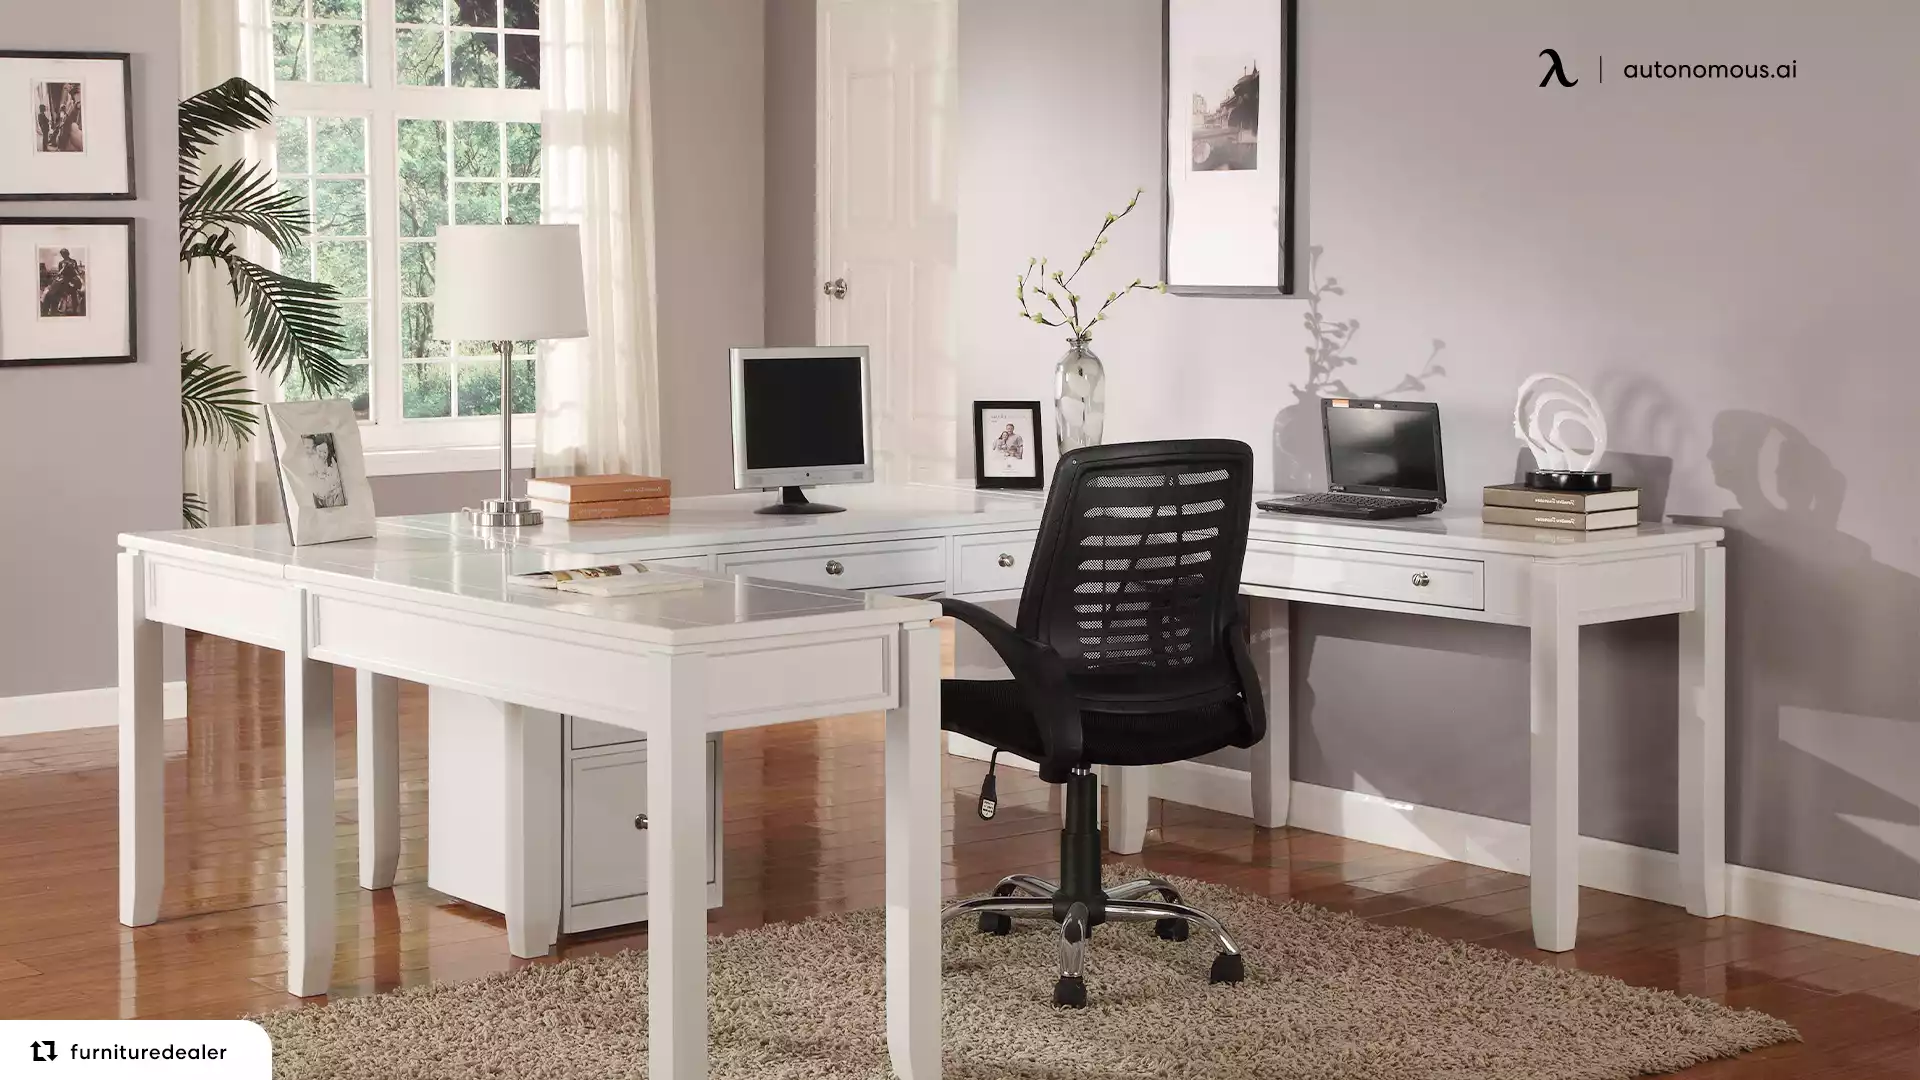 Build a Shared Space in U-shaped home office